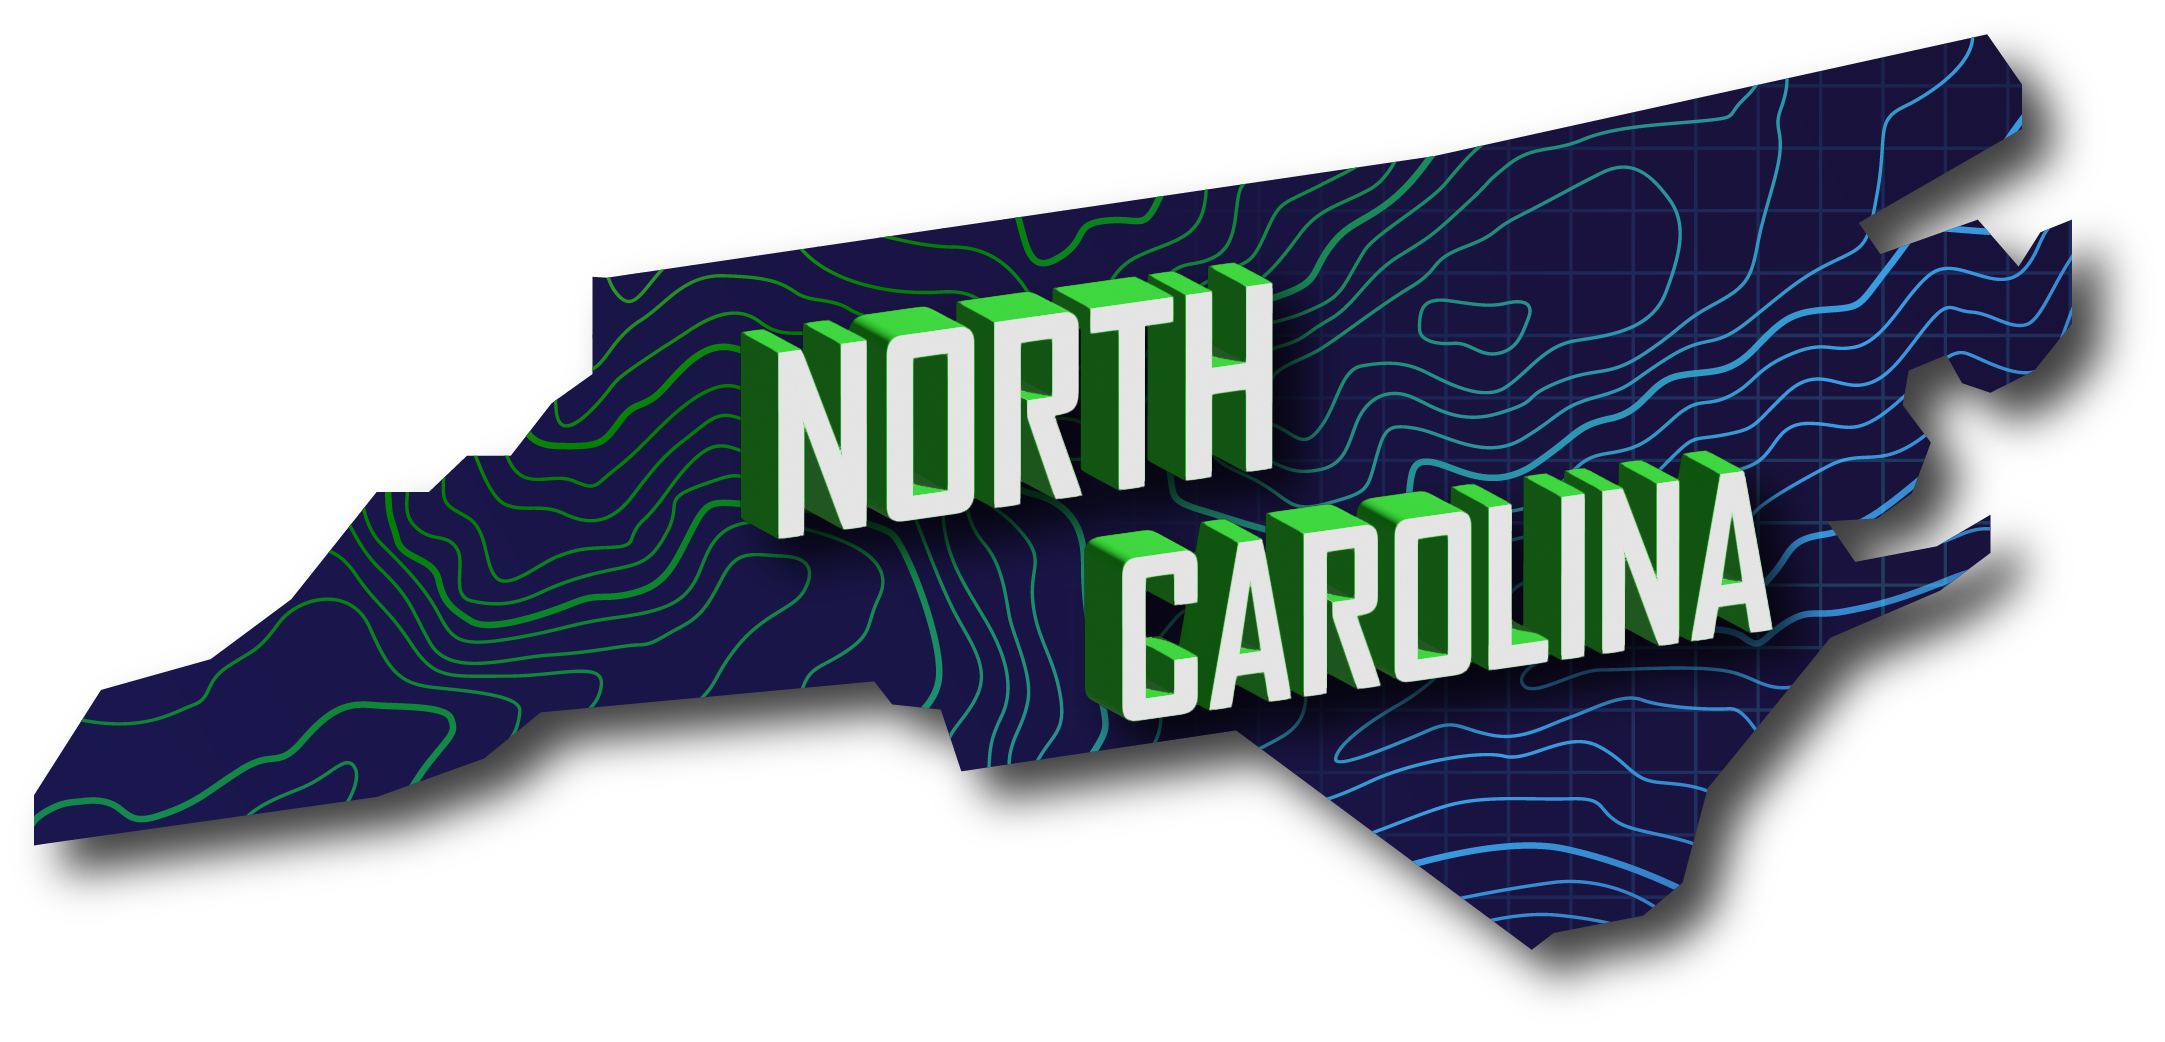 Shape of North Carolina with topographic pattern and words NORTH CAROLINA written across it